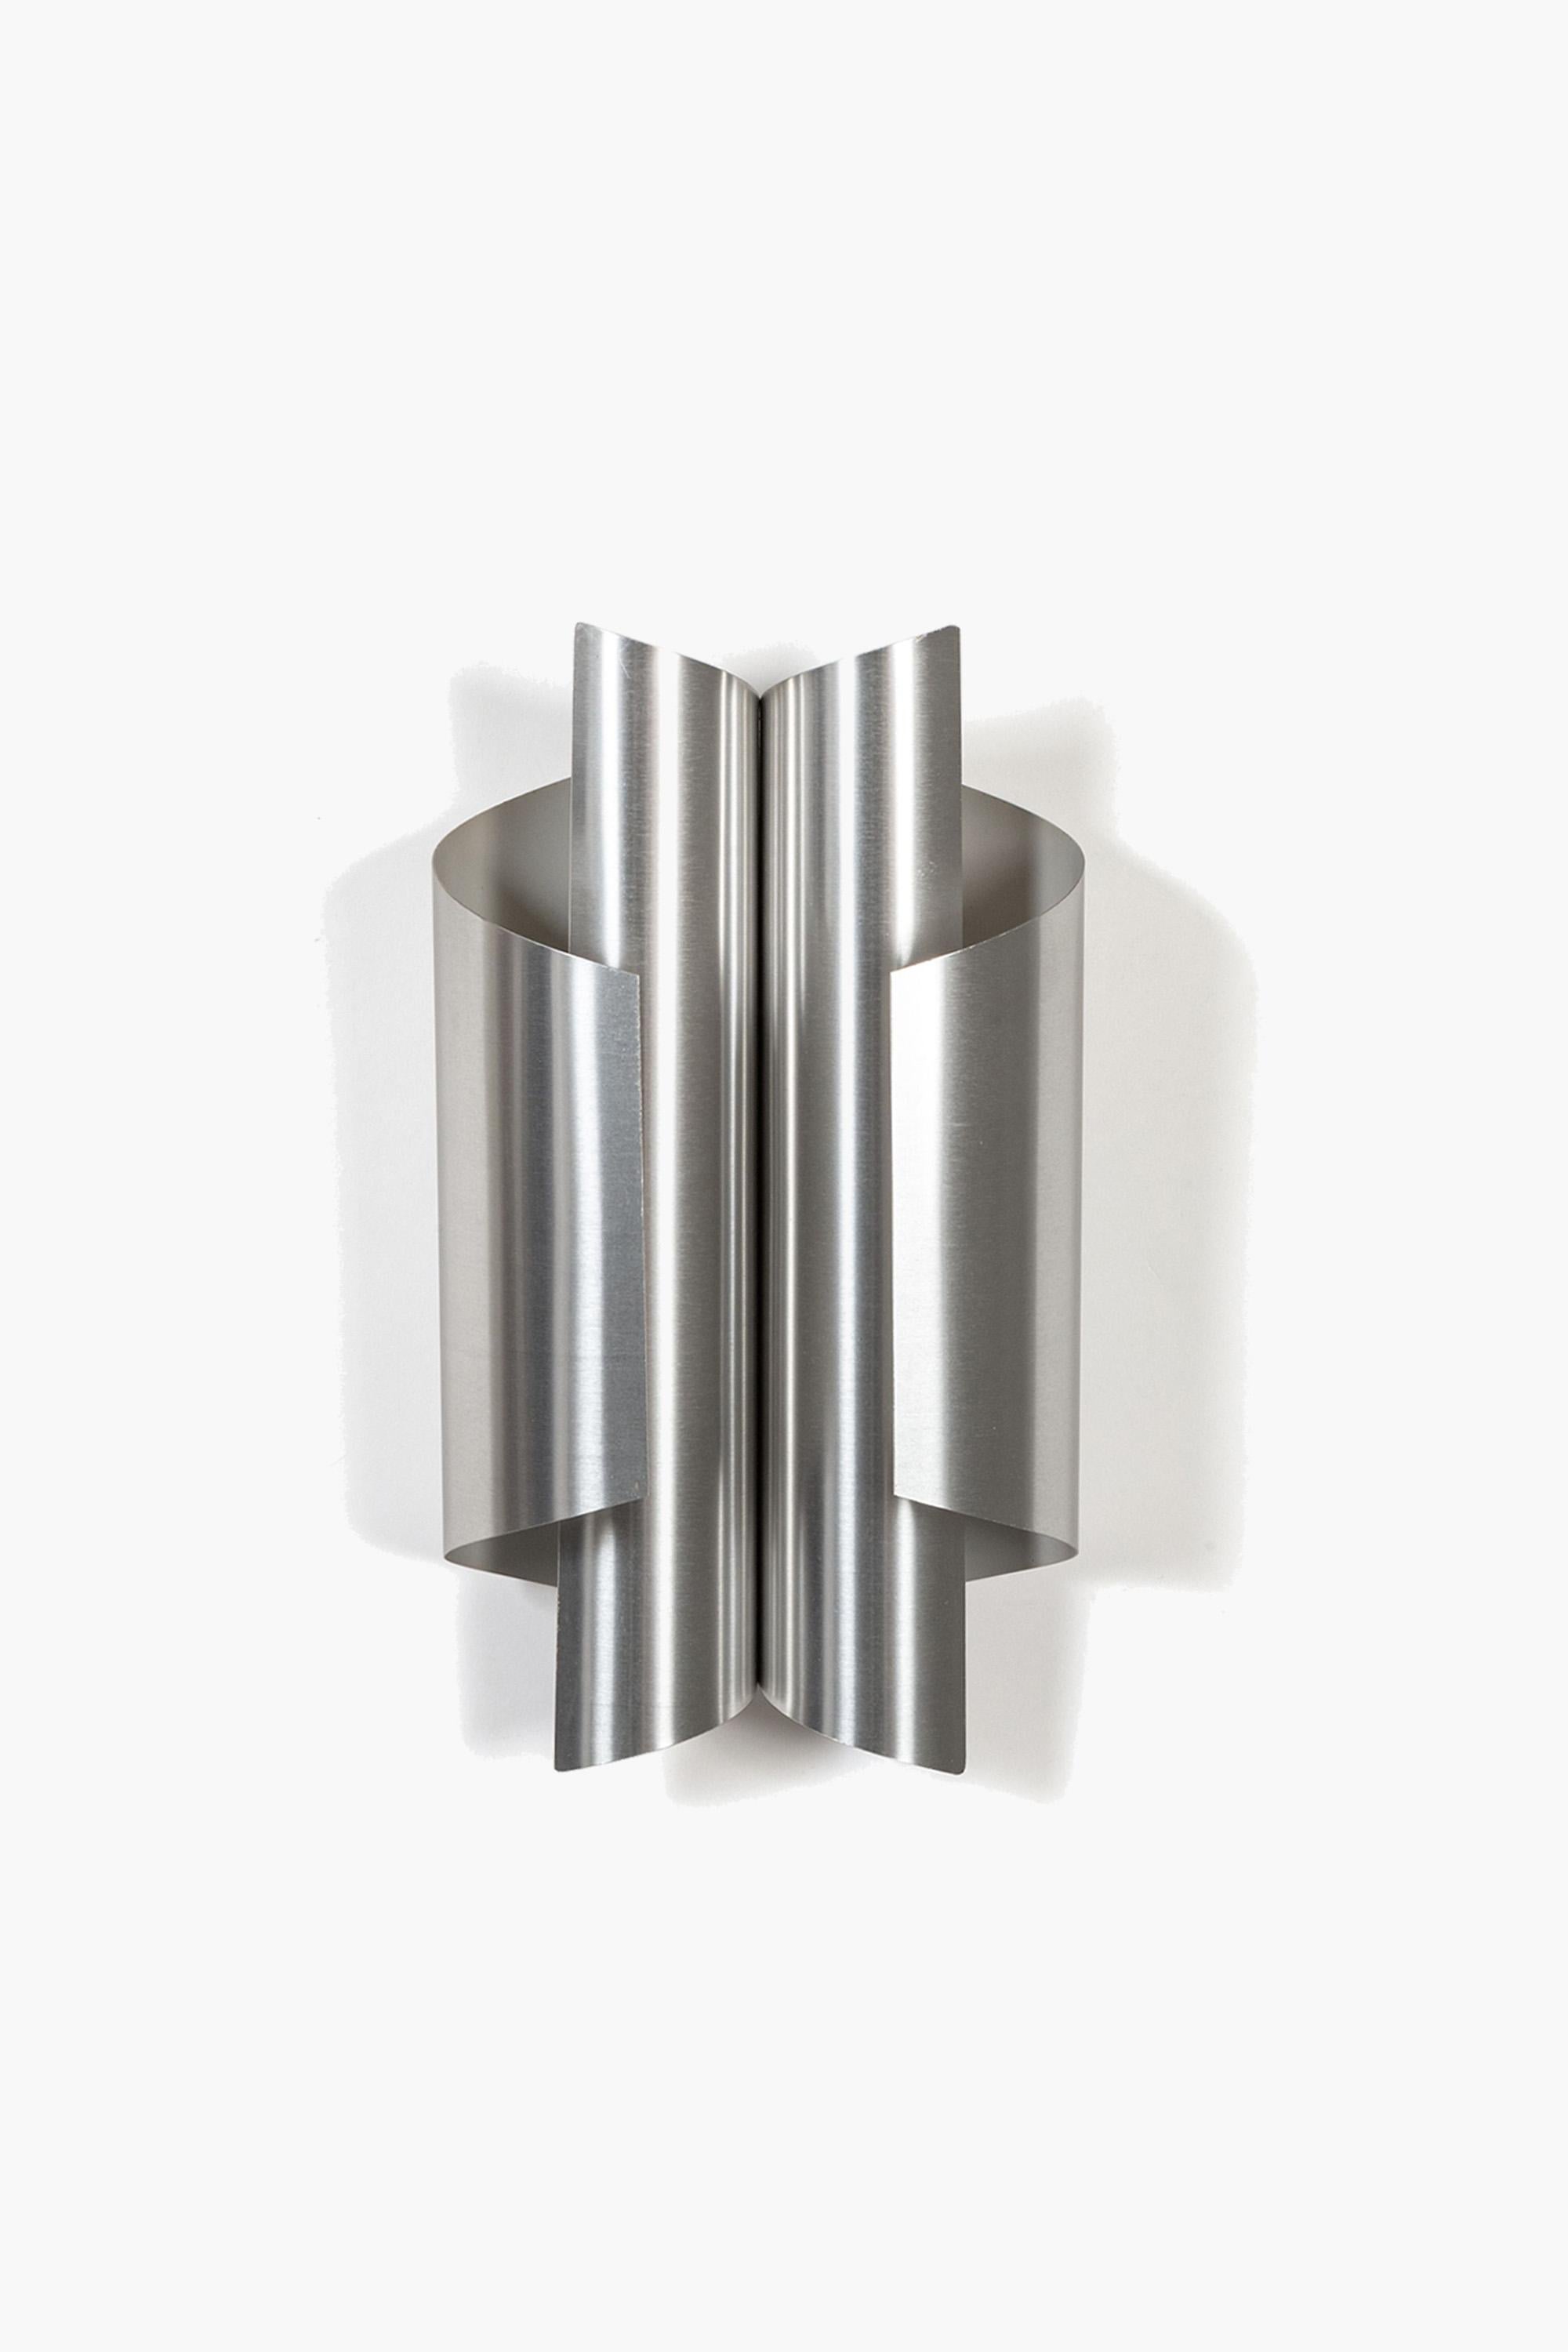 Mid-Century Modern Pair of Sculptural Brushed Aluminium Wall Lights, Italian, 1970s For Sale